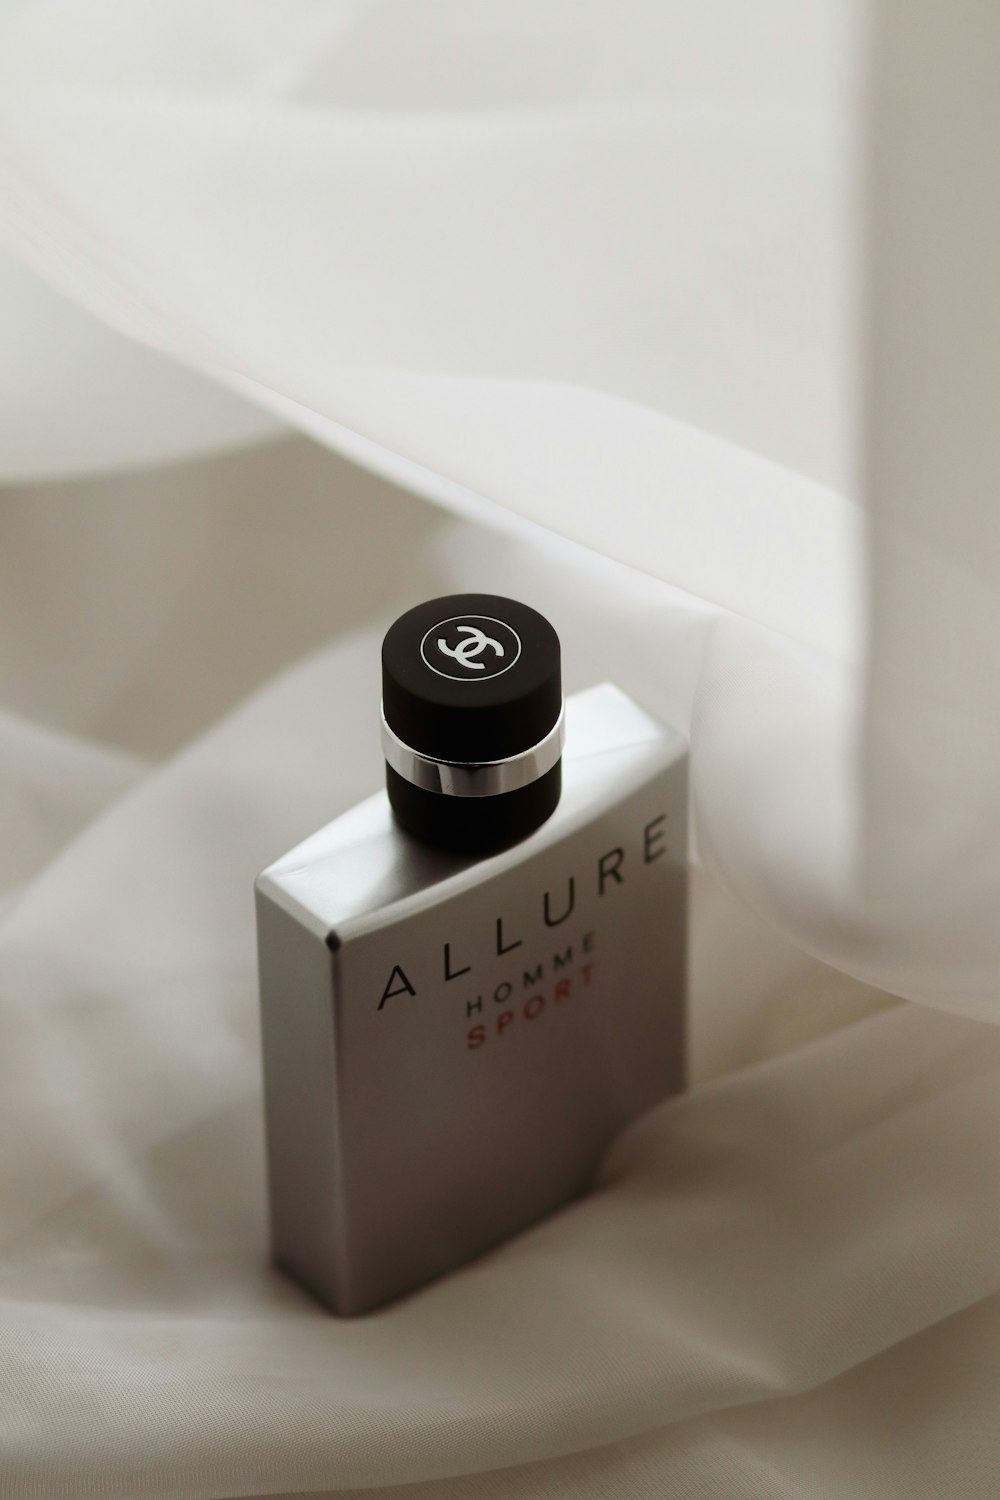 Chanel Allure Homme All-Over Spray 3.4 oz.